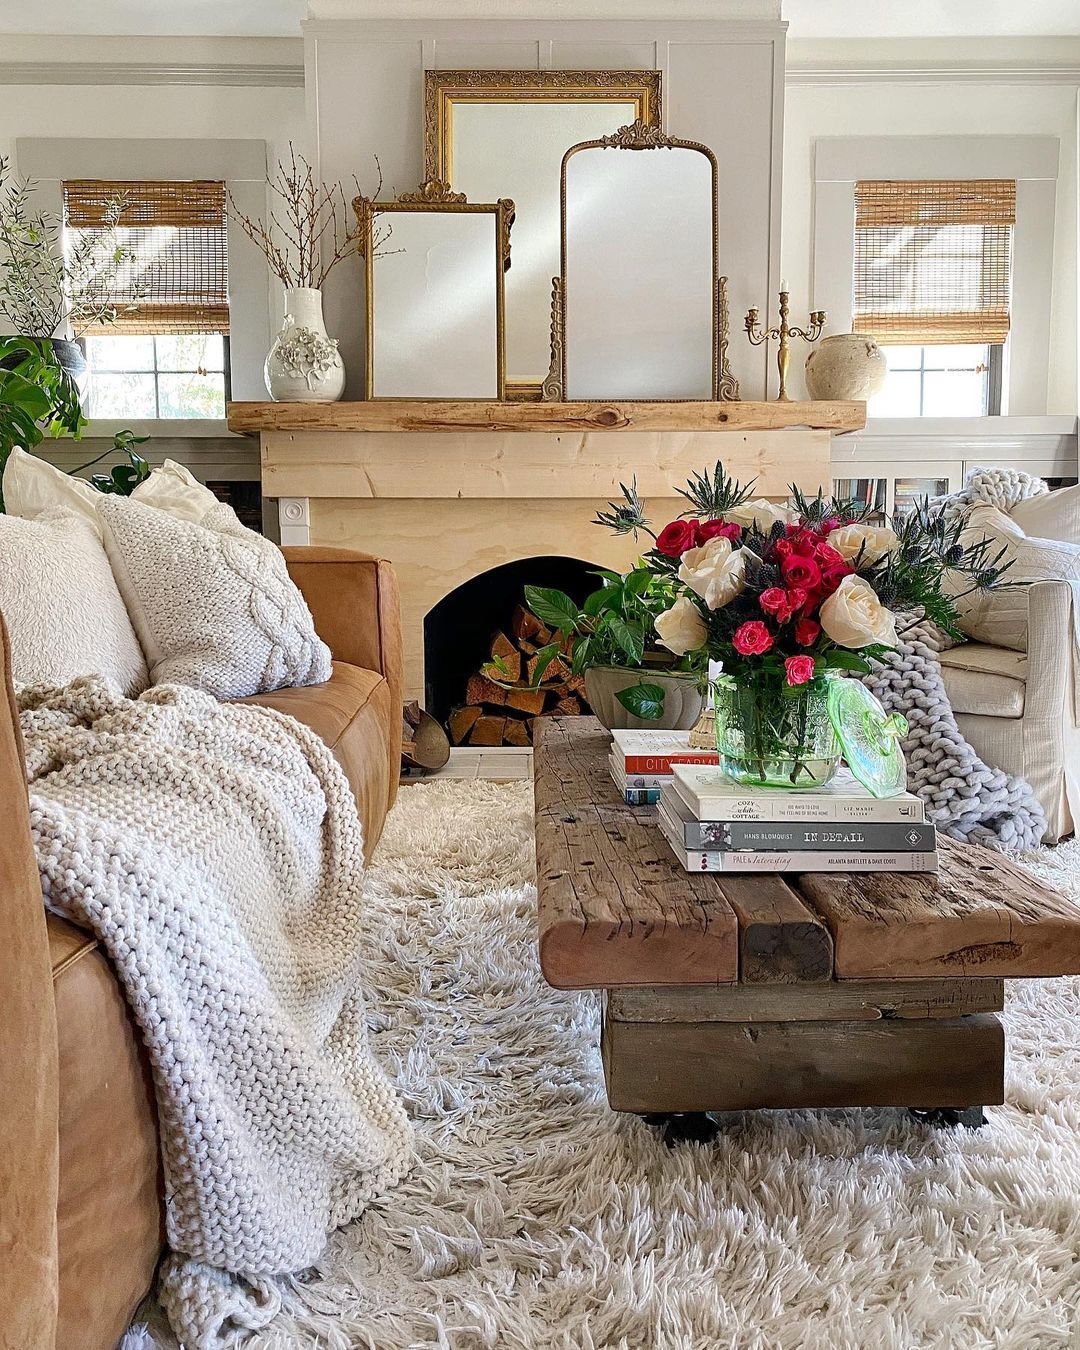 throw blankets, throw pillows, plush area rug make for a cozy winter decor while using textiles to add textures to a living space